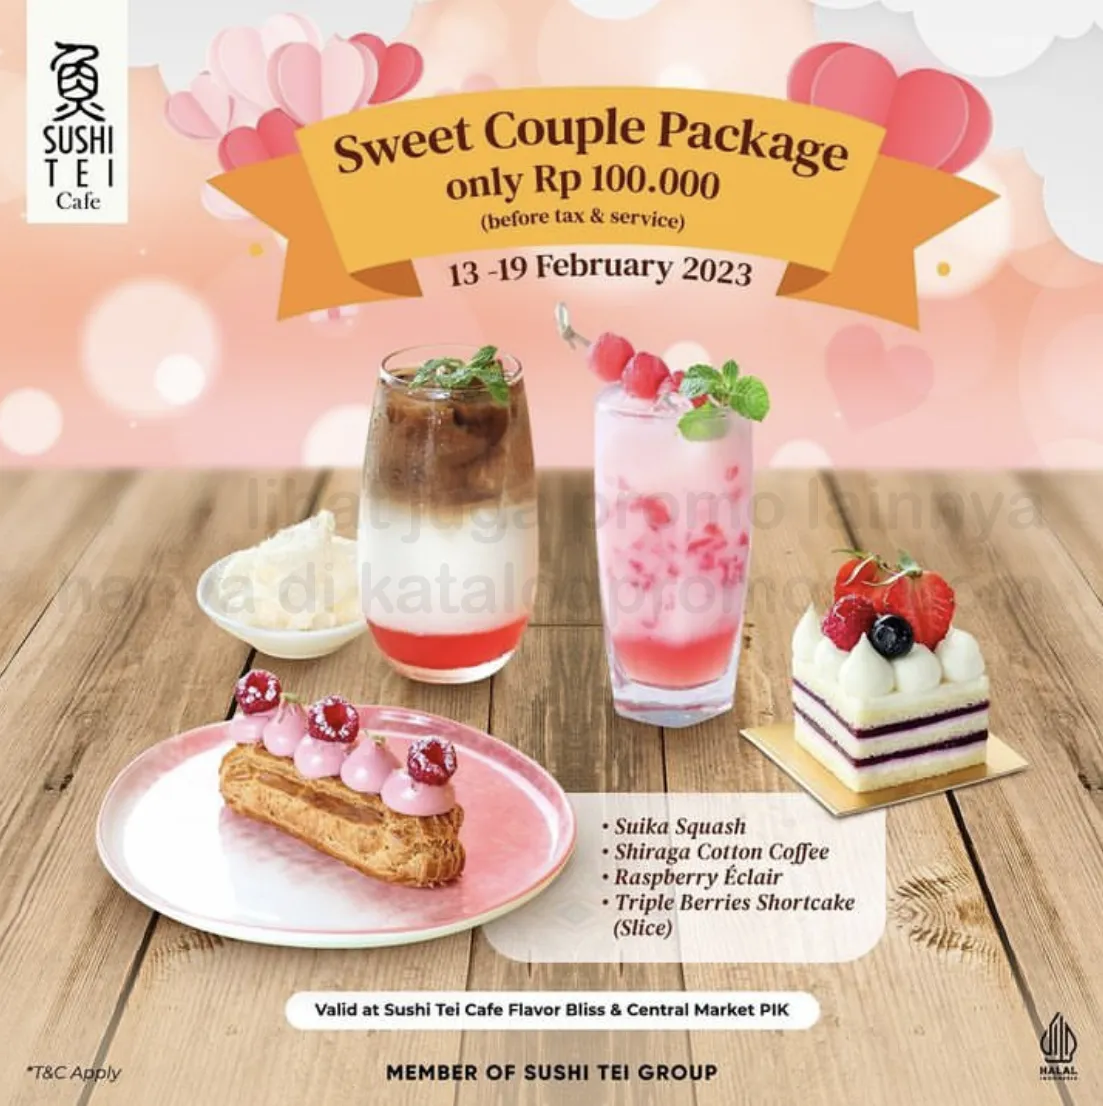 Promo SUSHI TEI Sweet Couple Package for only Rp 100.000